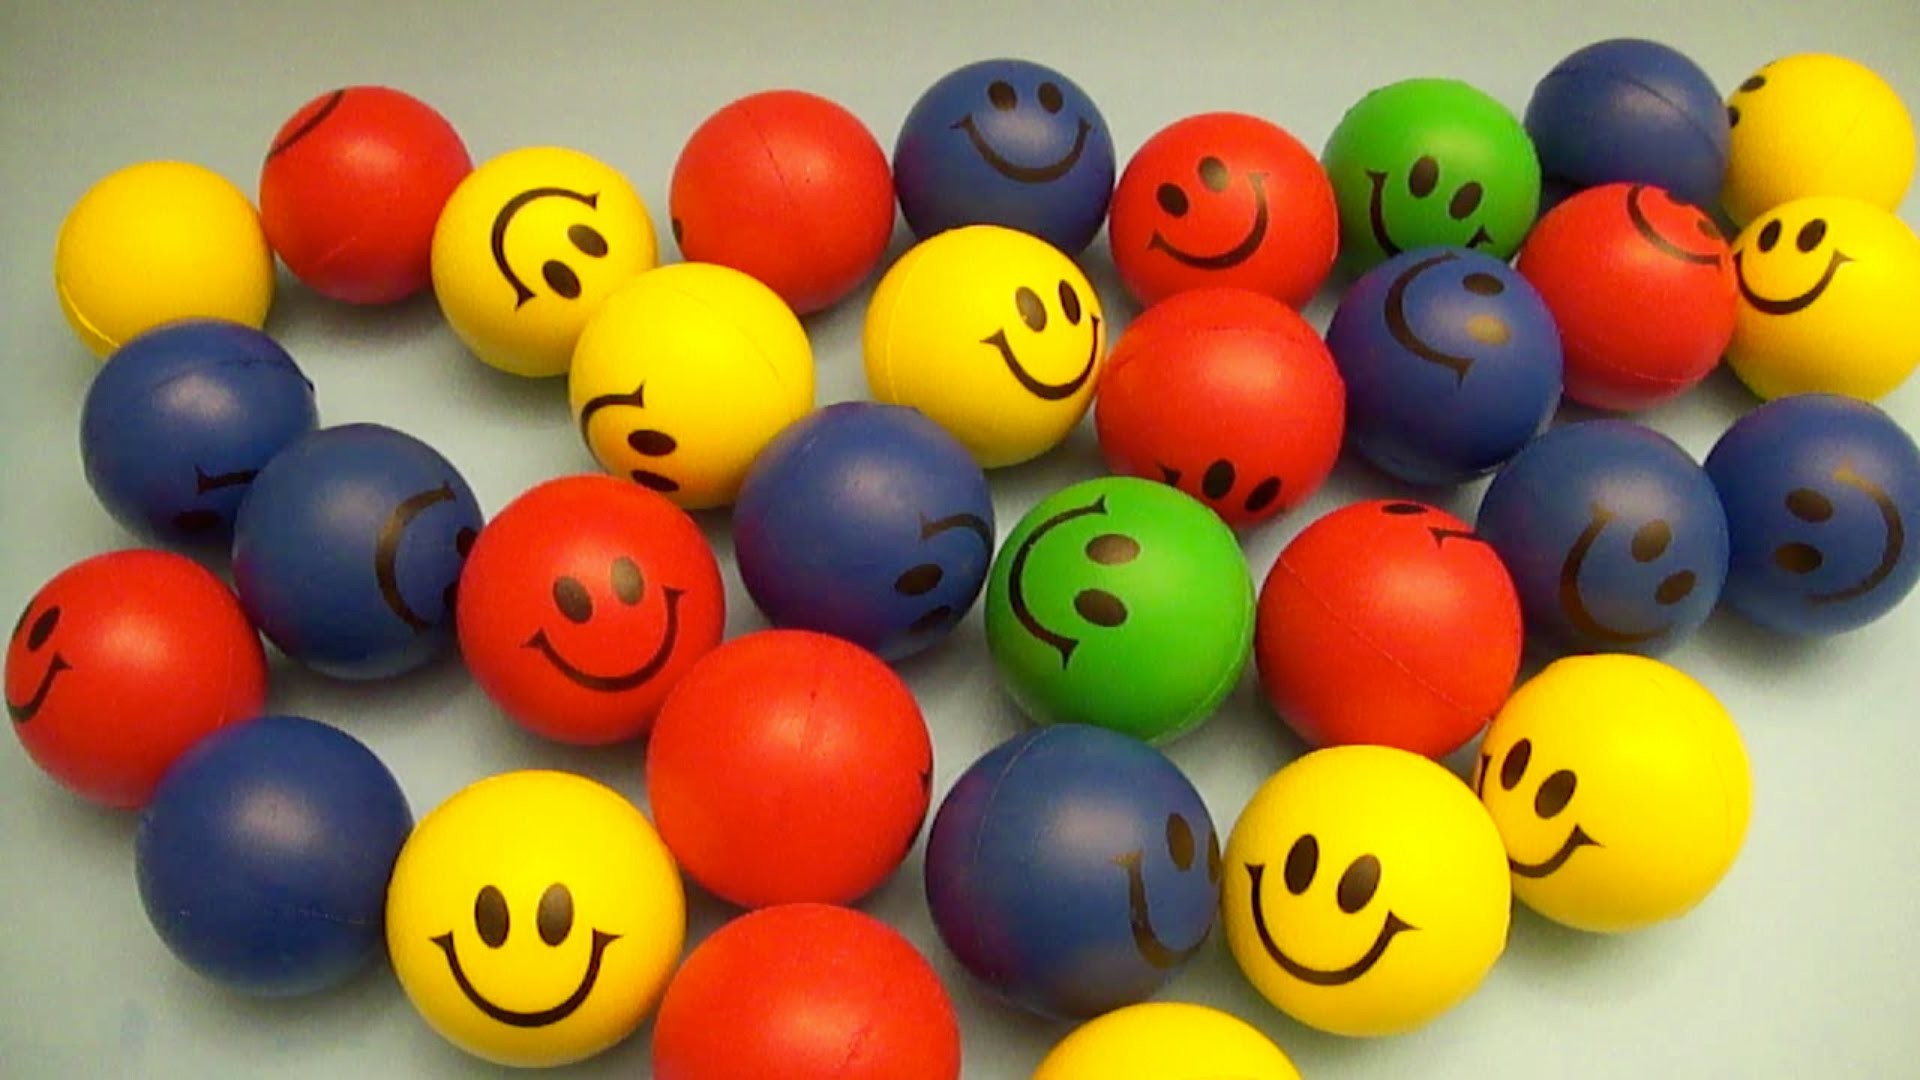 1920x1080 Learn Colours with HUGE Smiley Face Squishy Balls! Fun Learning Contest! -  YouTube